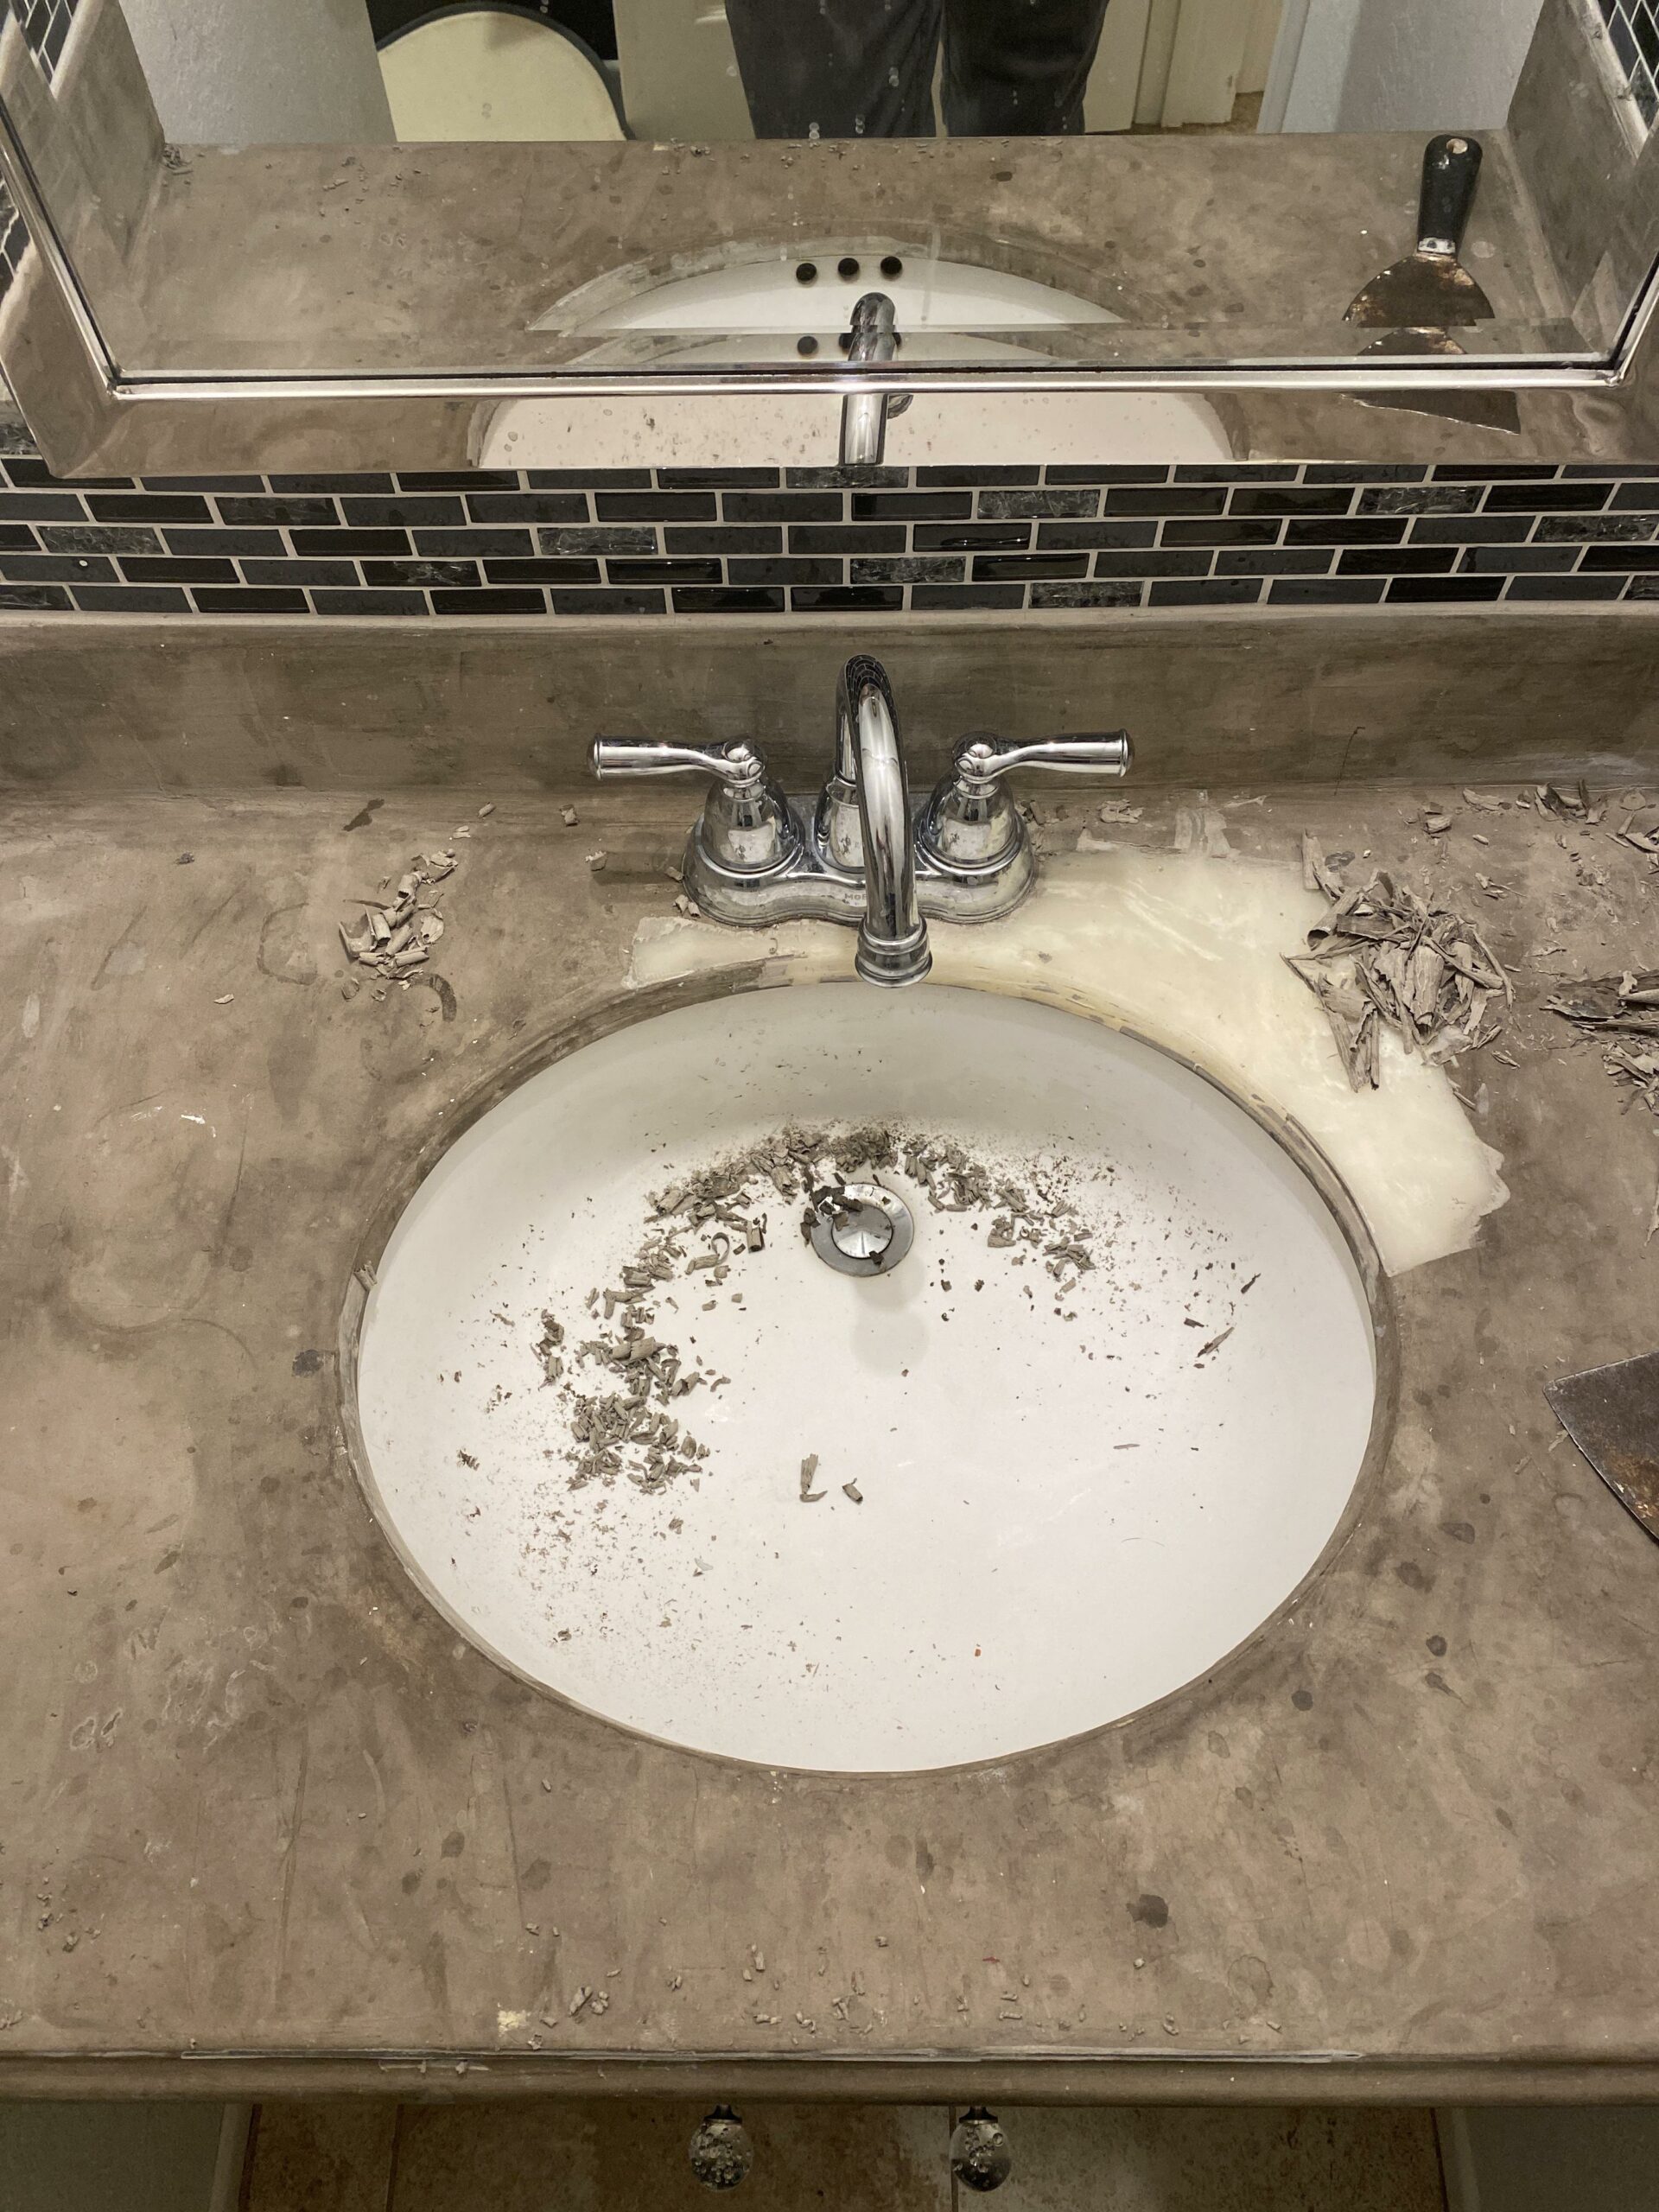 Please, do not cover you bathroom counter in cement. This has homeowner written all over it.